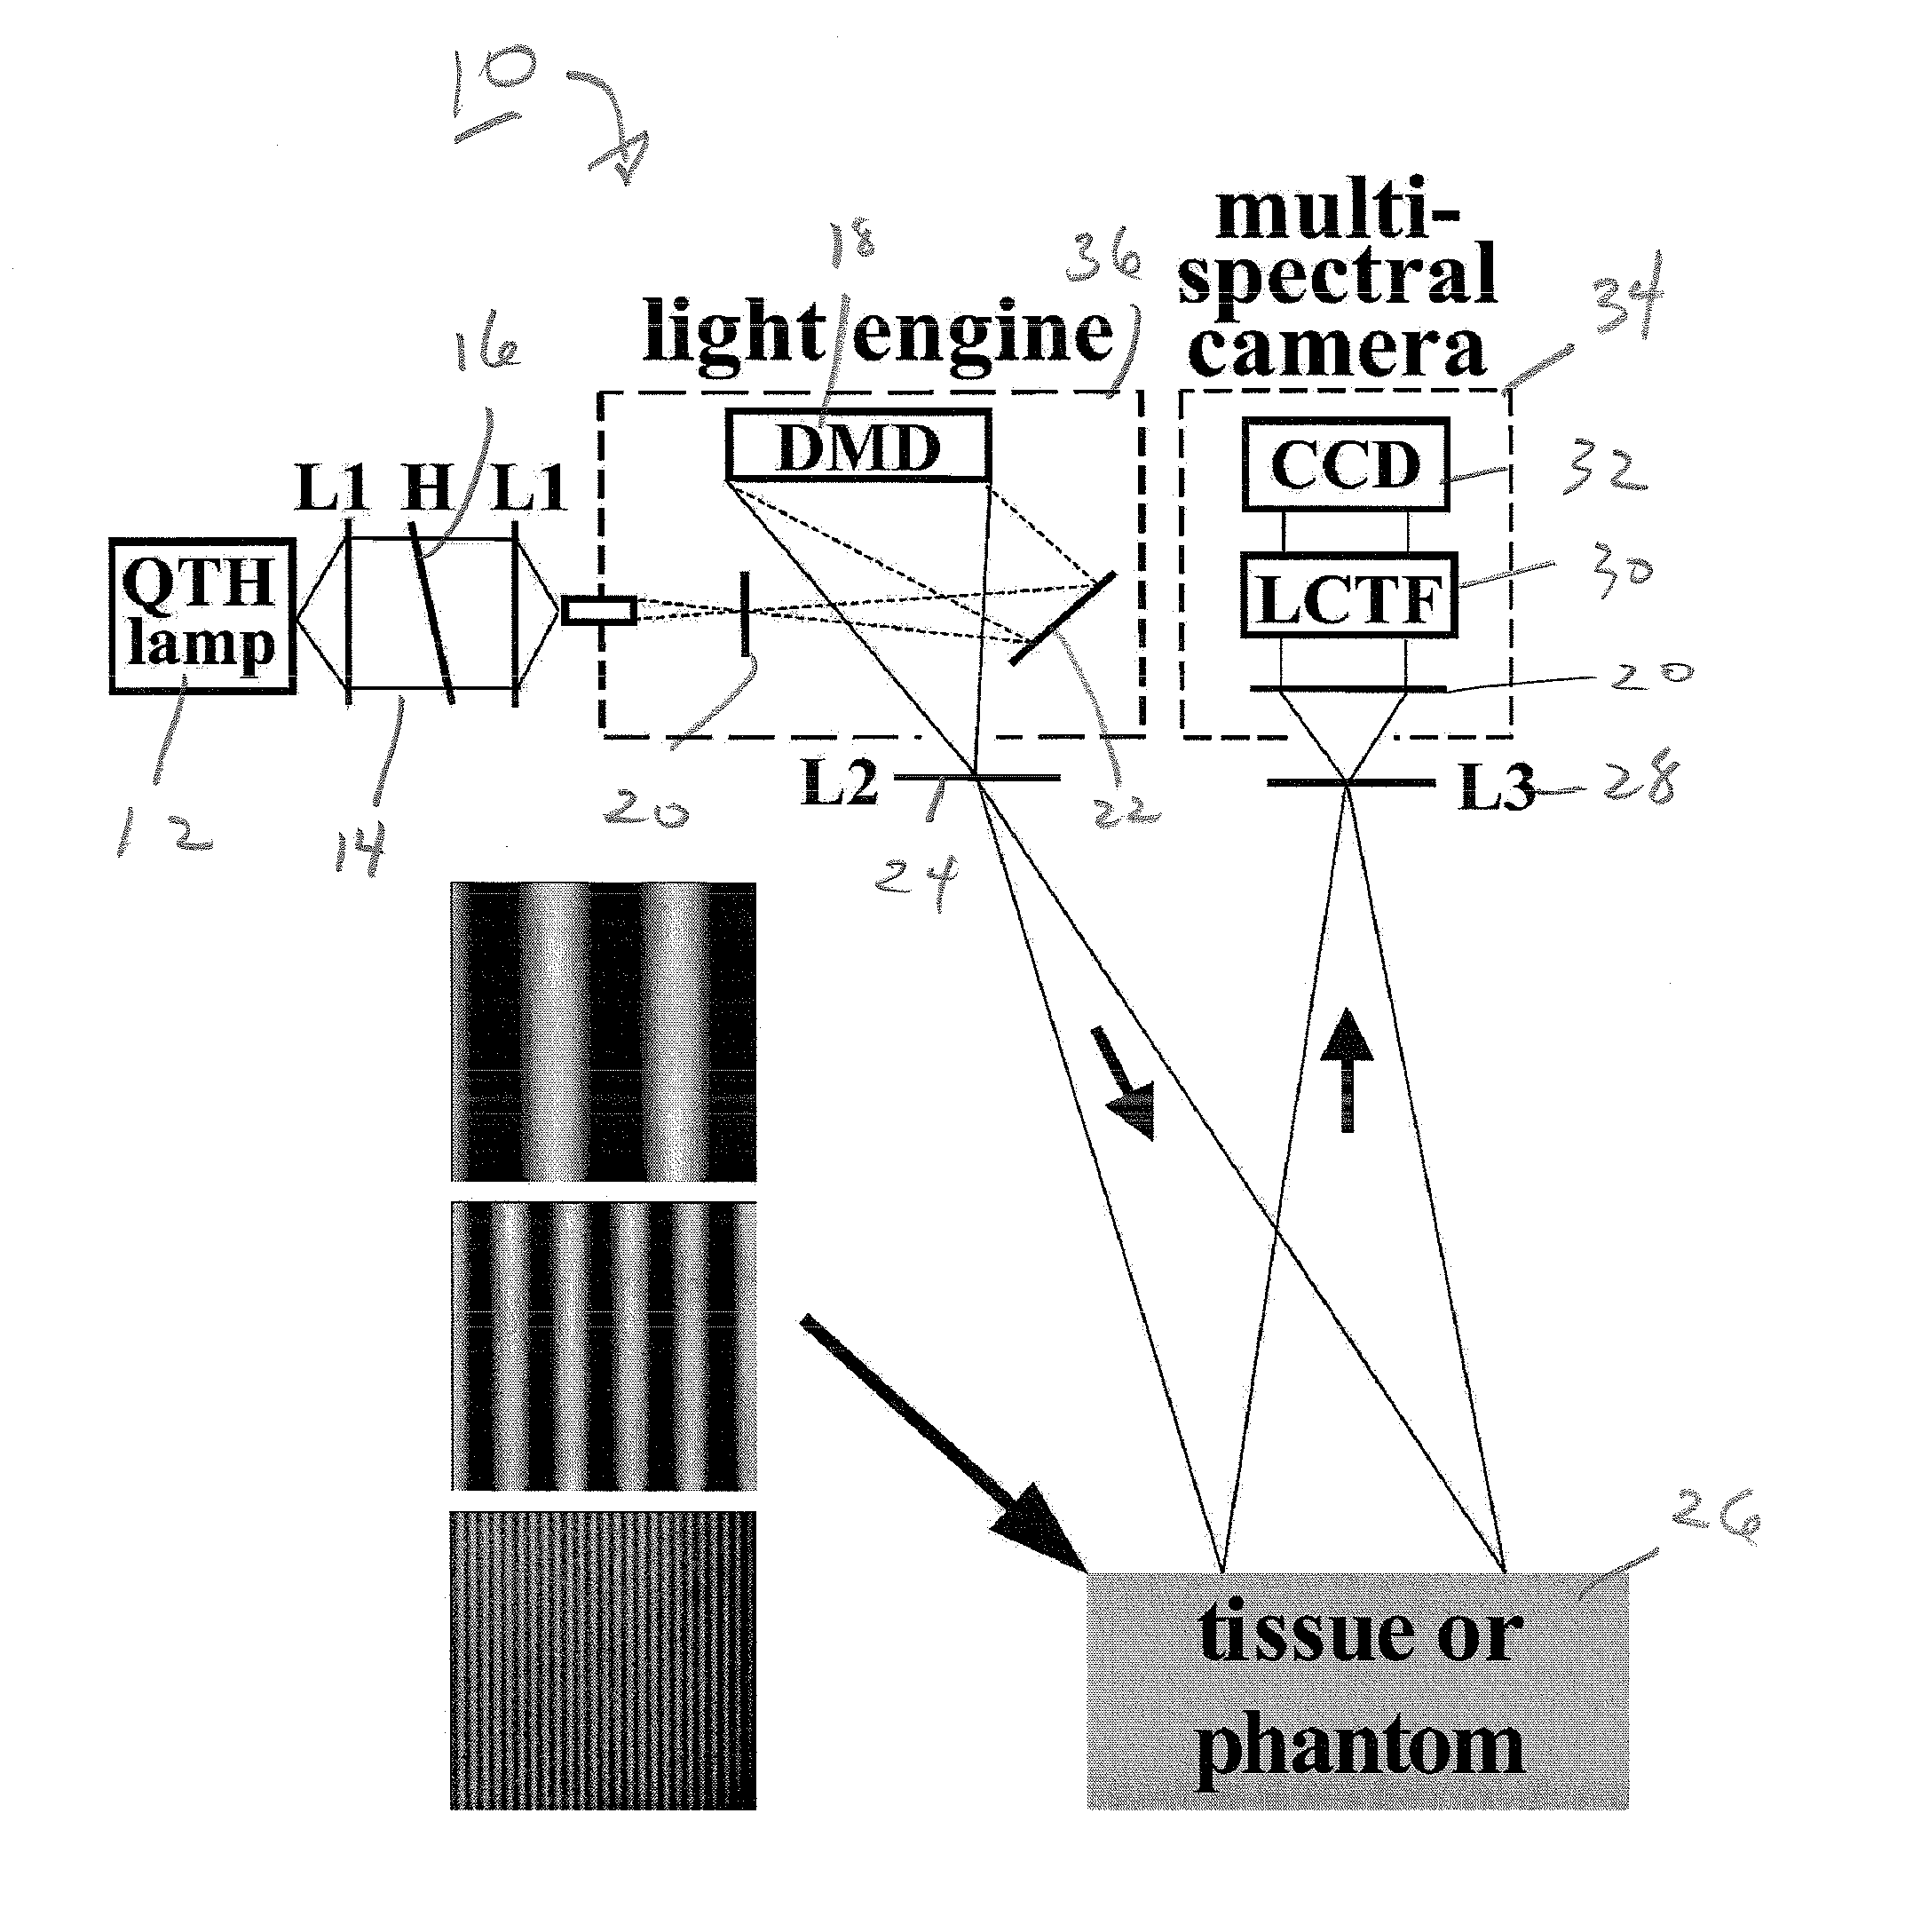 Method and apparatus for performing qualitative and quantitative analysis of produce (fruit, vegetables) using spatially structured illumination